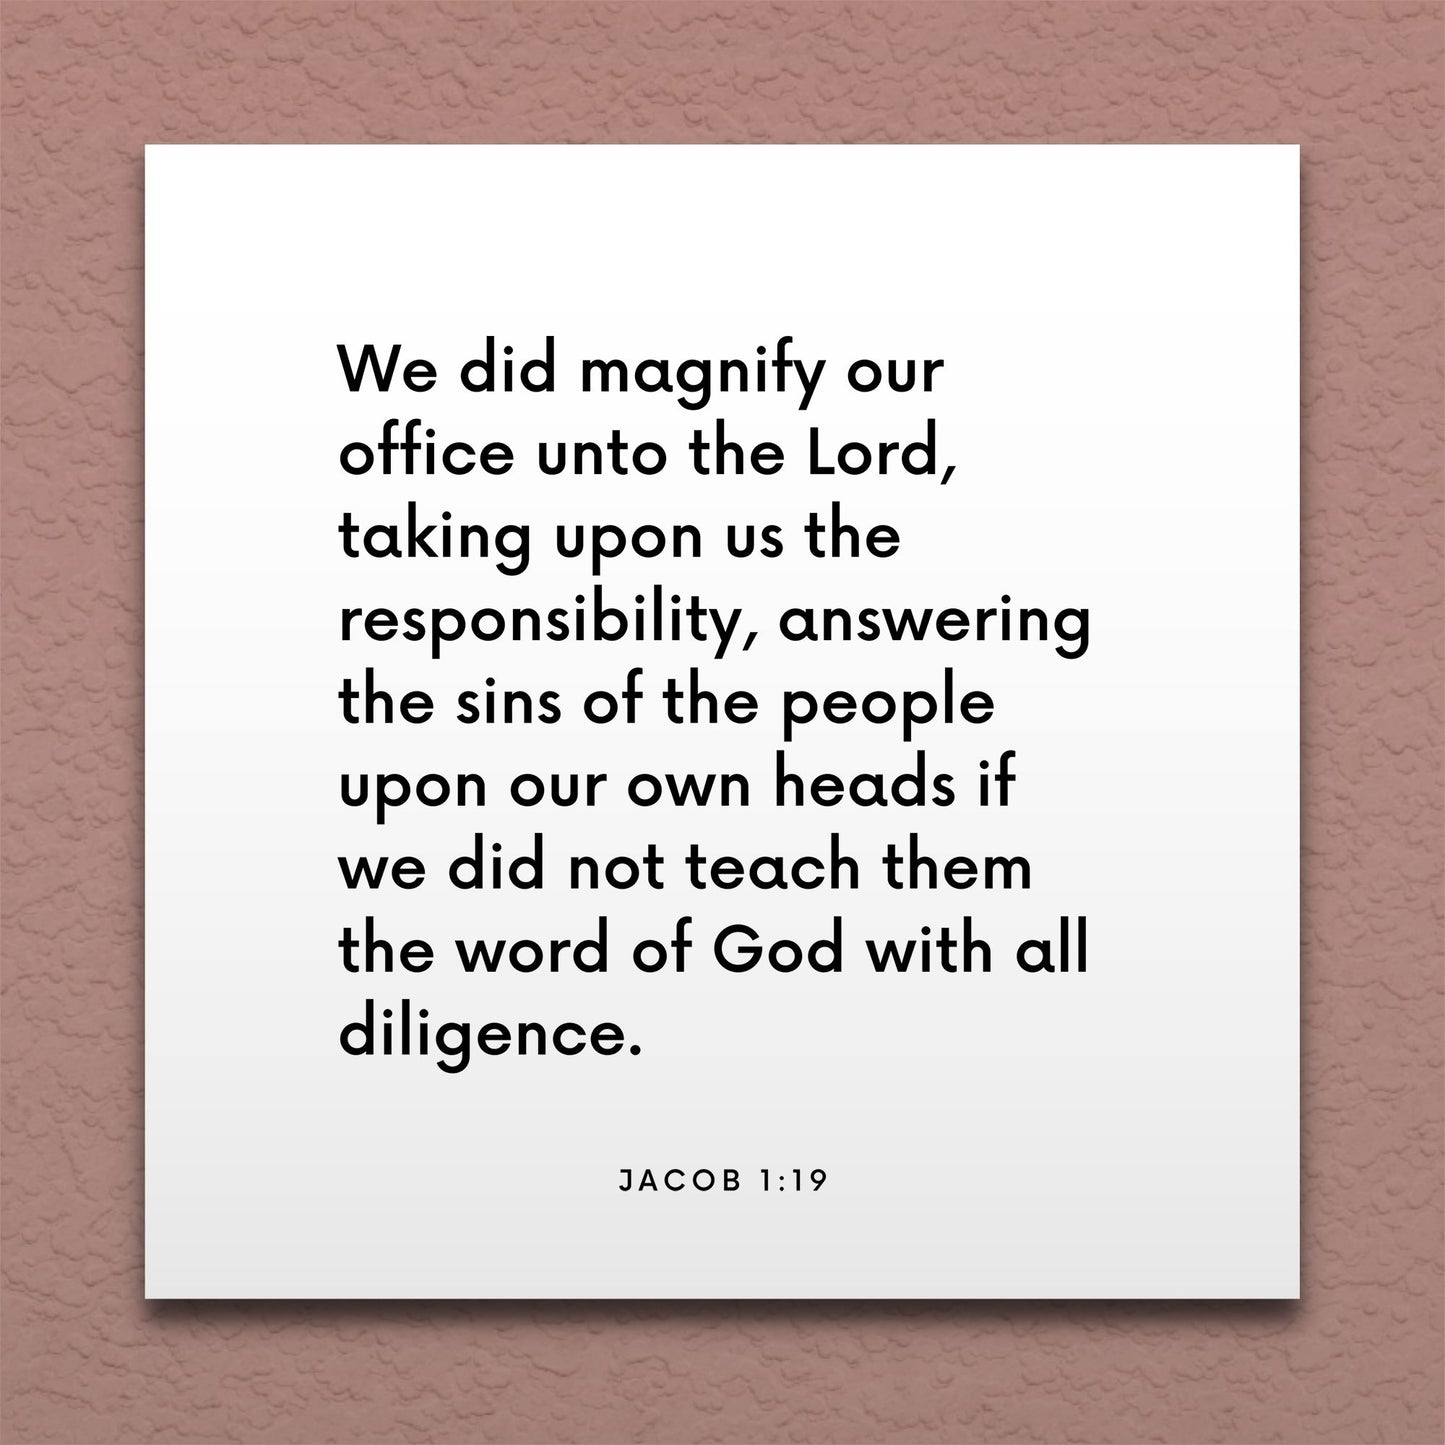 Wall-mounted scripture tile for Jacob 1:19 - "We did magnify our office unto the Lord"